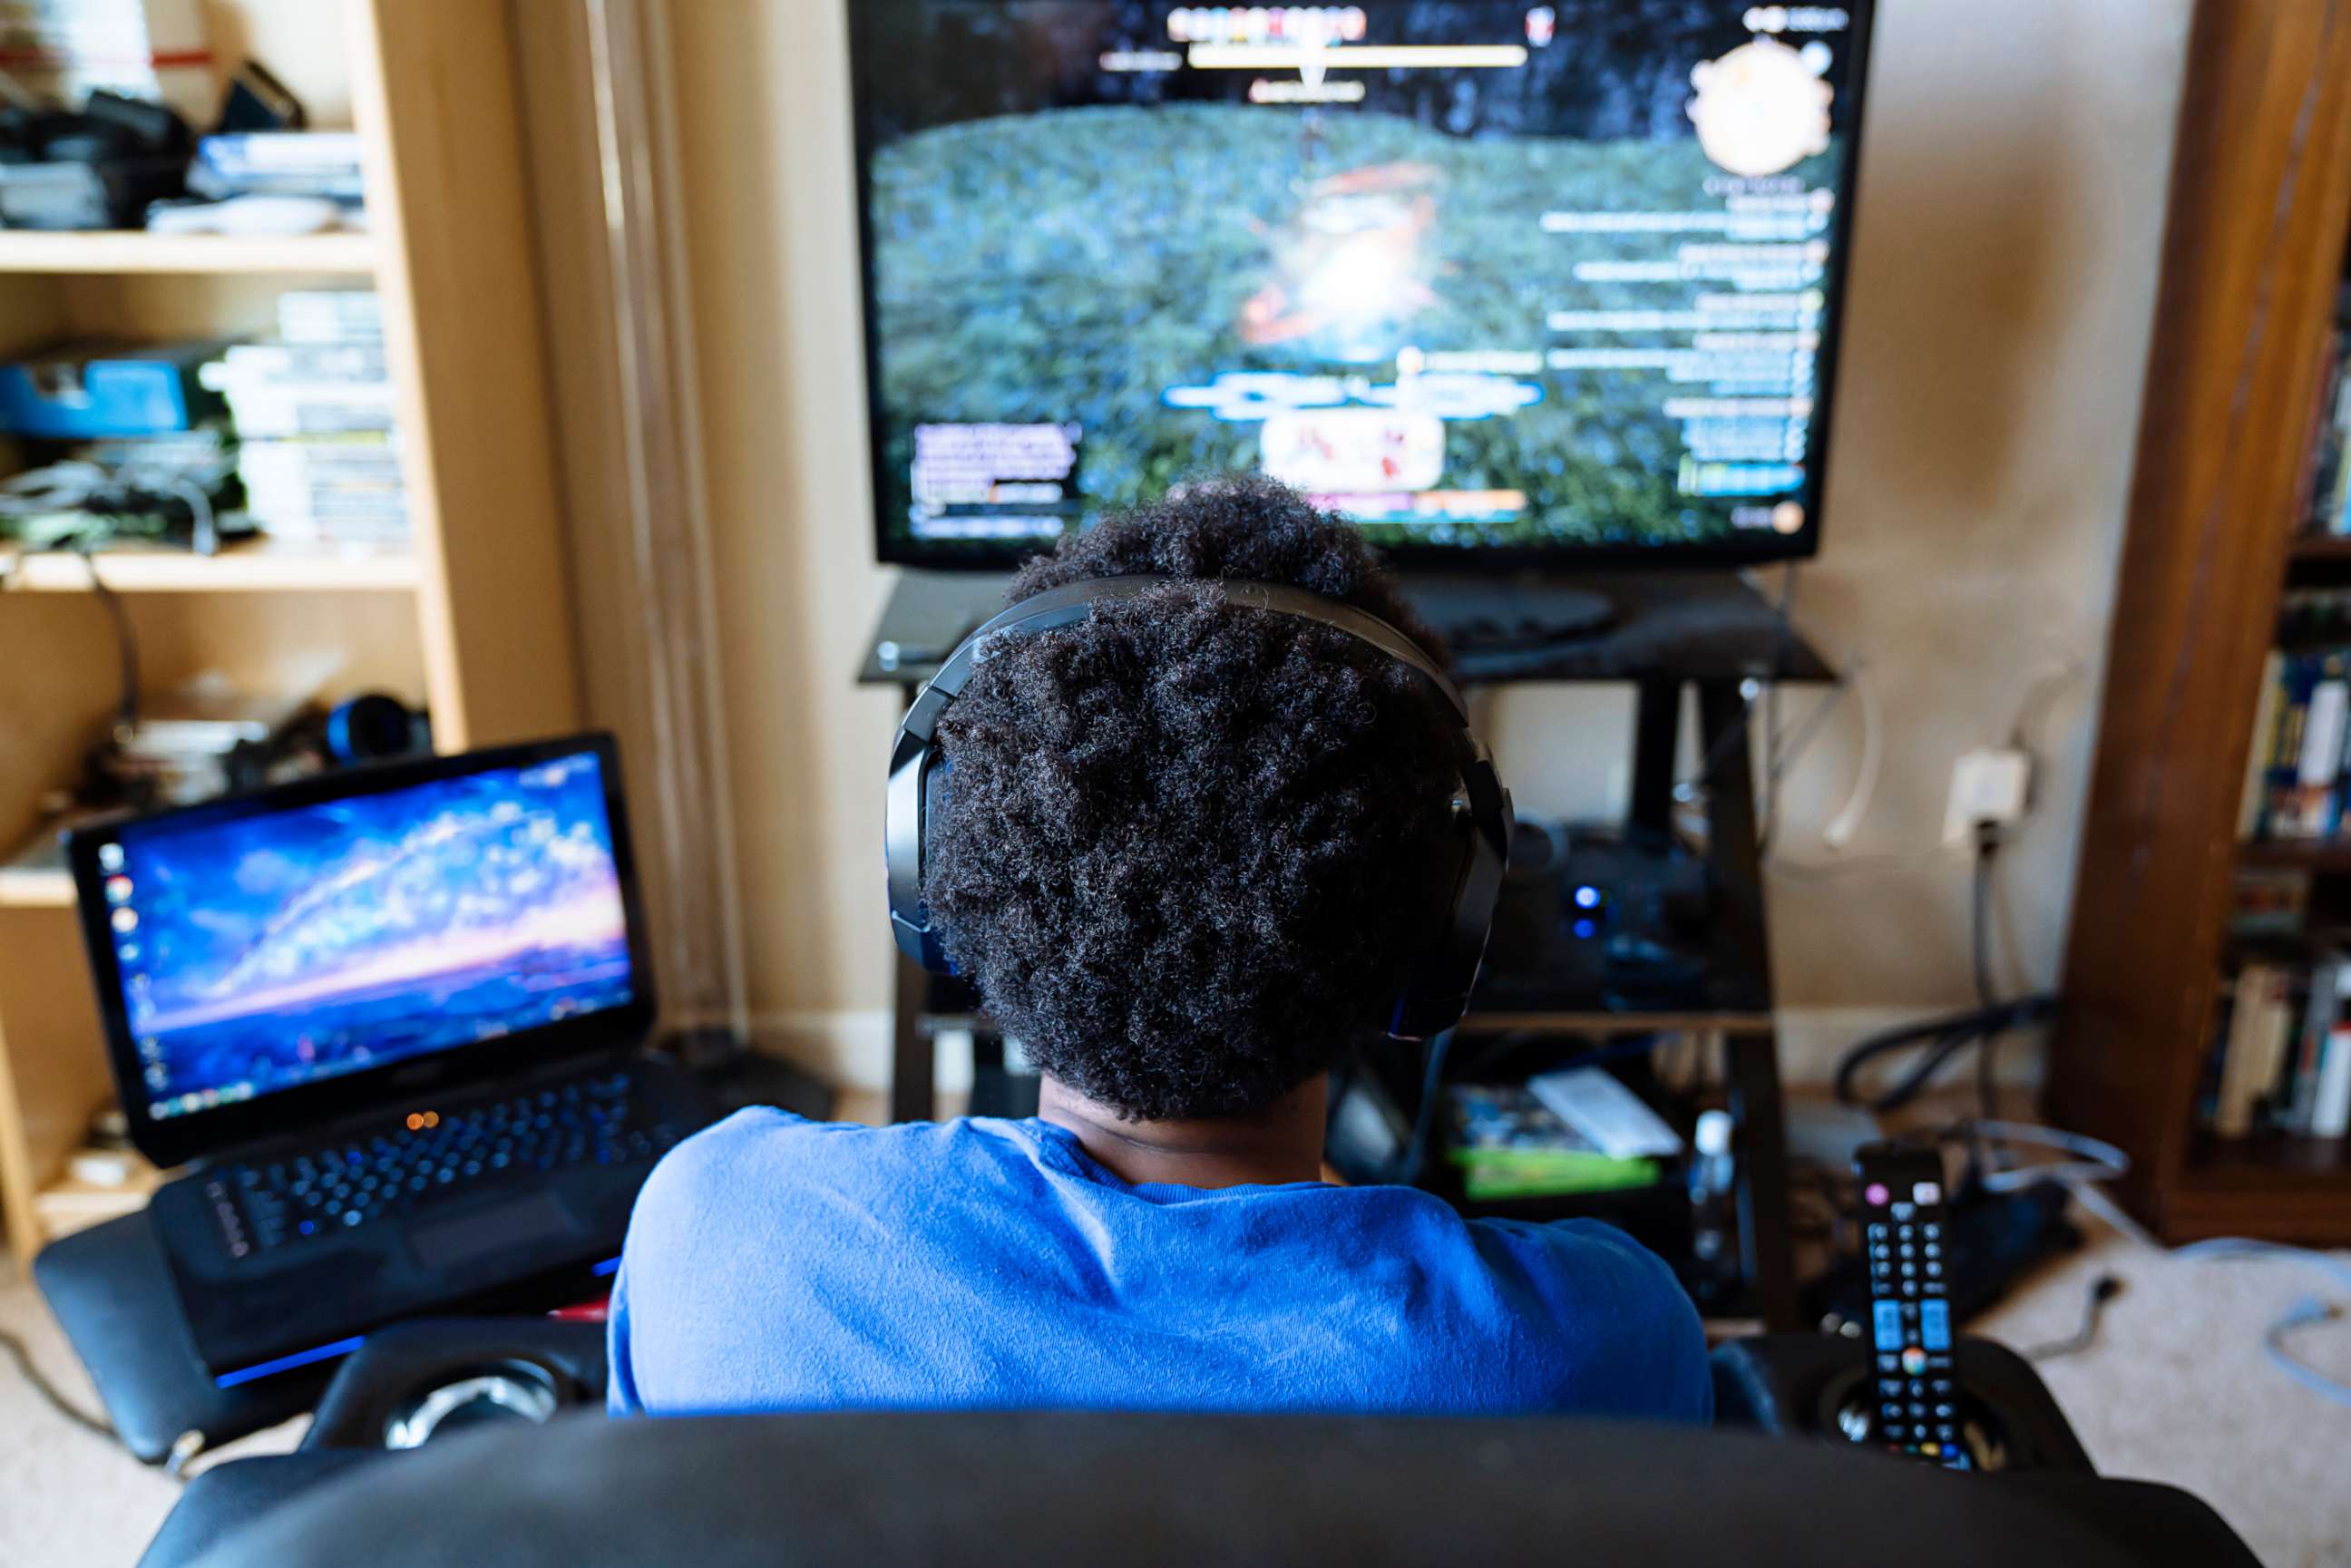 PHOTO: A man plays a video game in this stock photo.